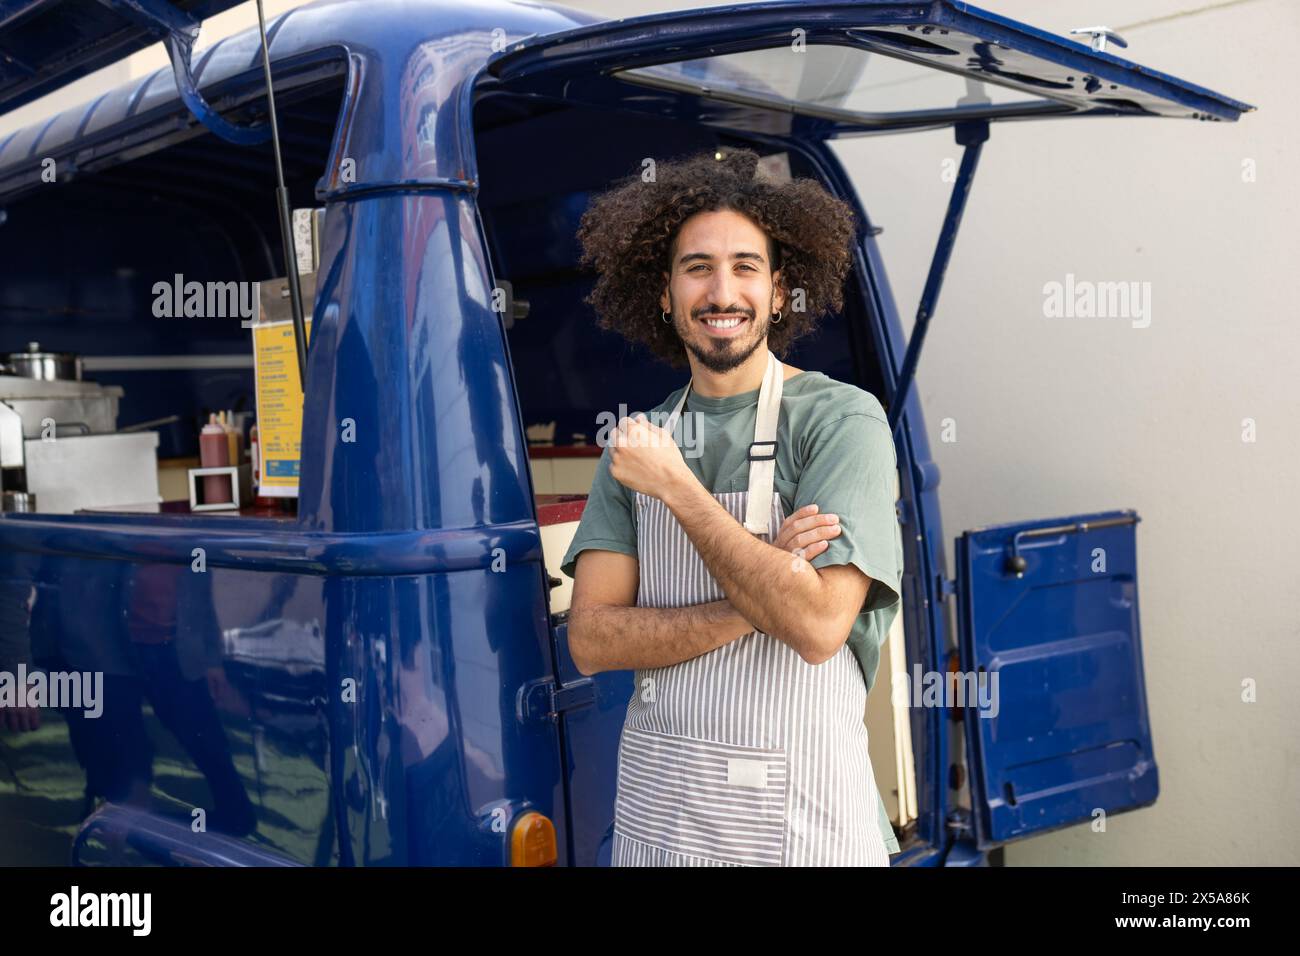 A jovial man with curly hair stands confidently outside his blue food truck, sporting a striped apron and giving a thumbs up Stock Photo